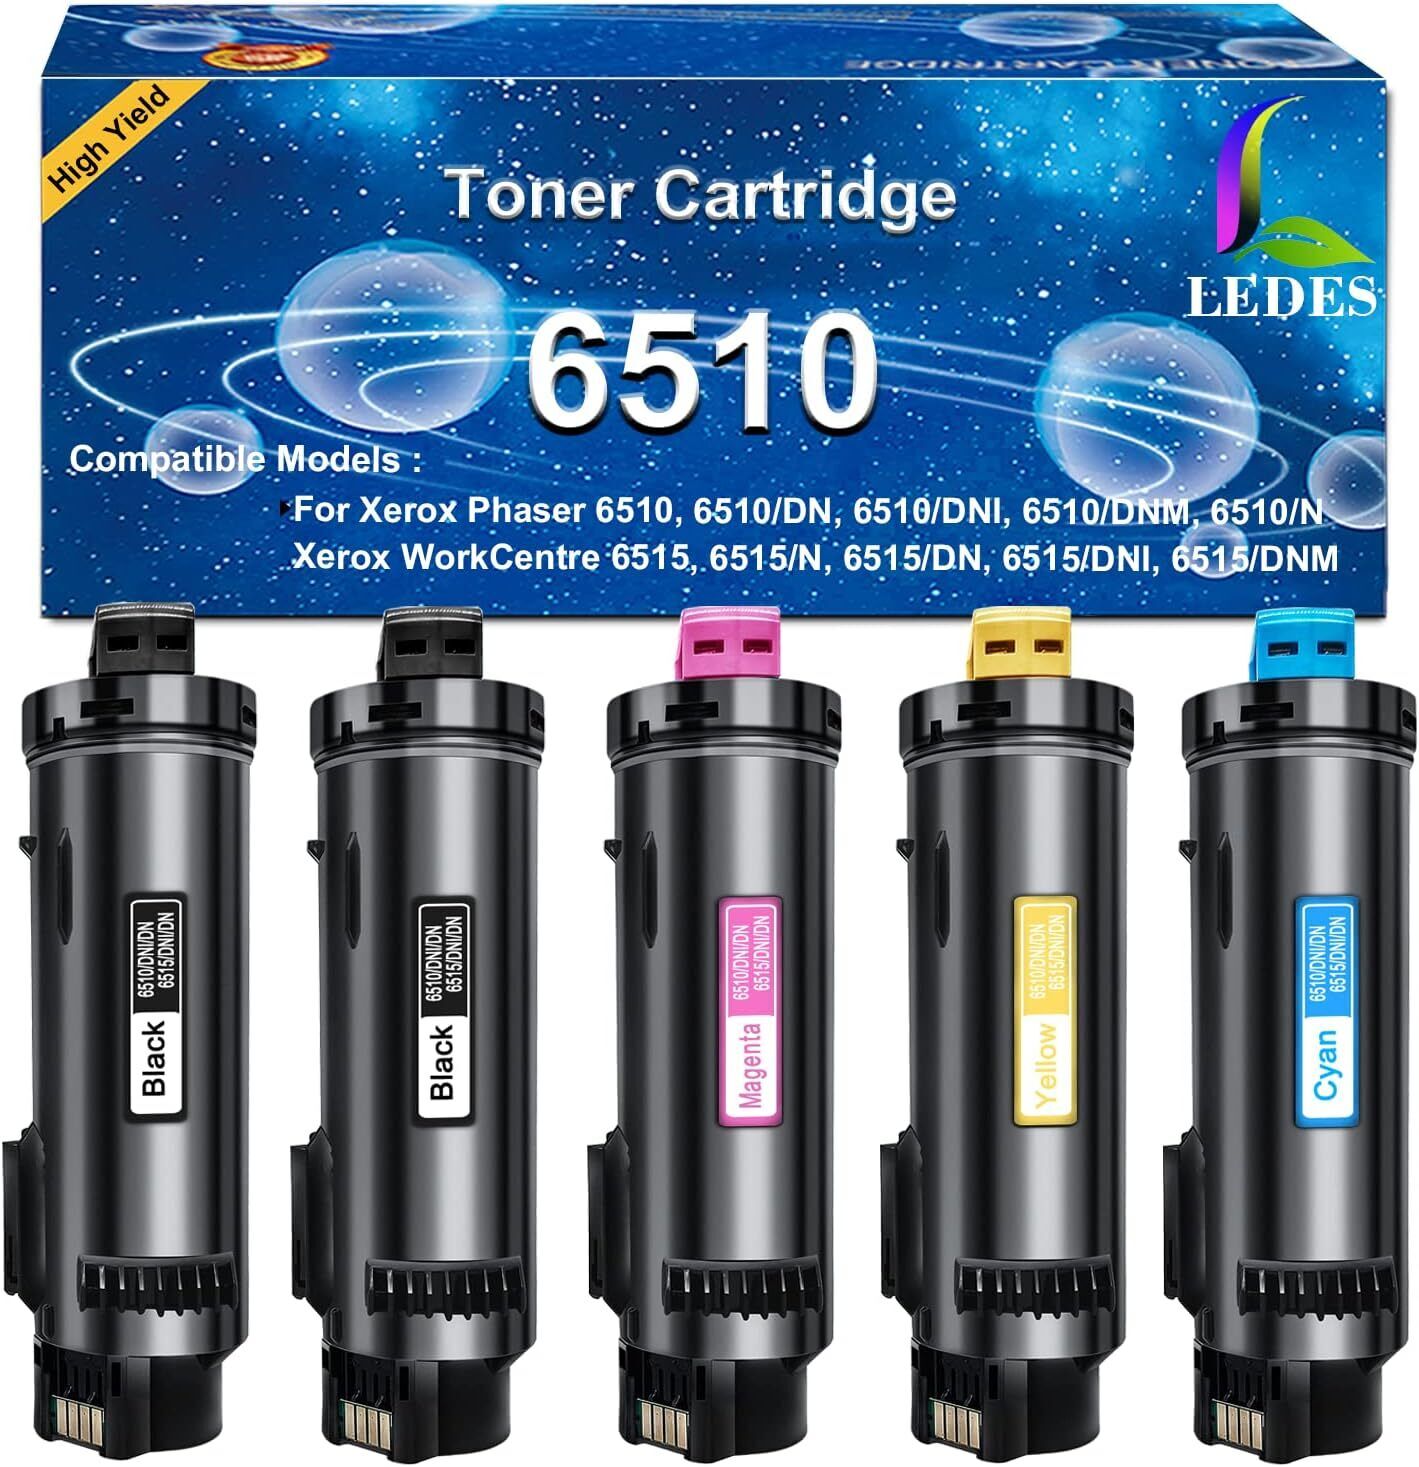 5pk Color Toner Cartridge For Xerox Phaser 6510 Workcentre 6515n 6515dn 6515dni